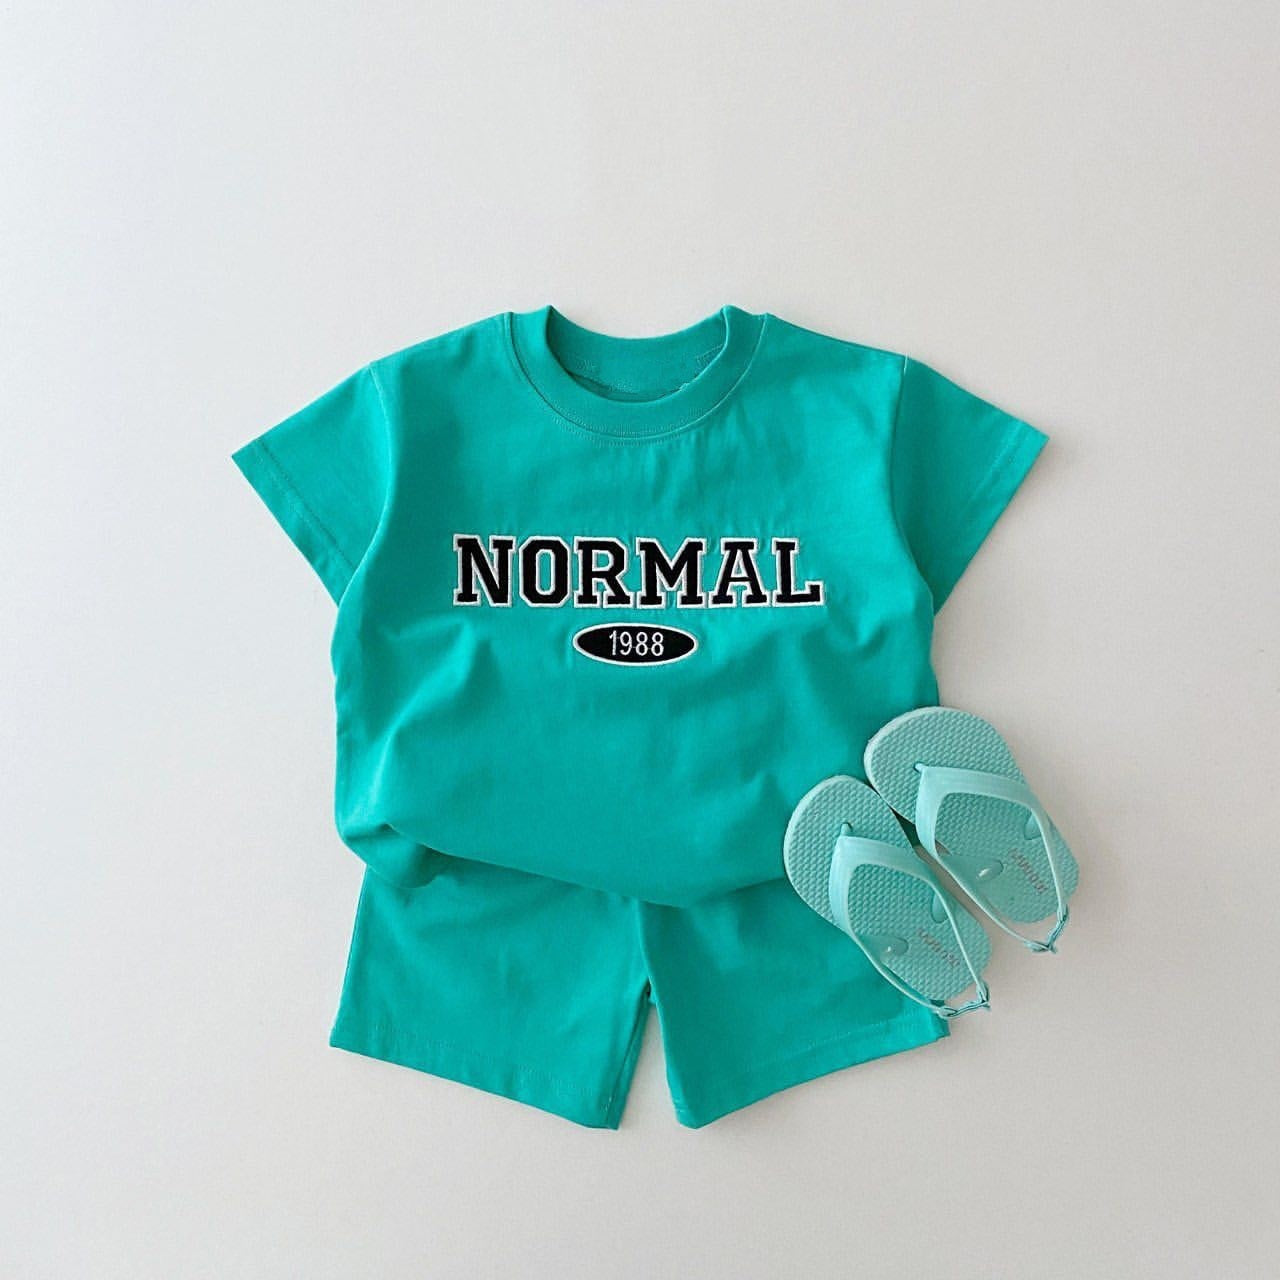 'Normal' Graphic Tee Set - Teal